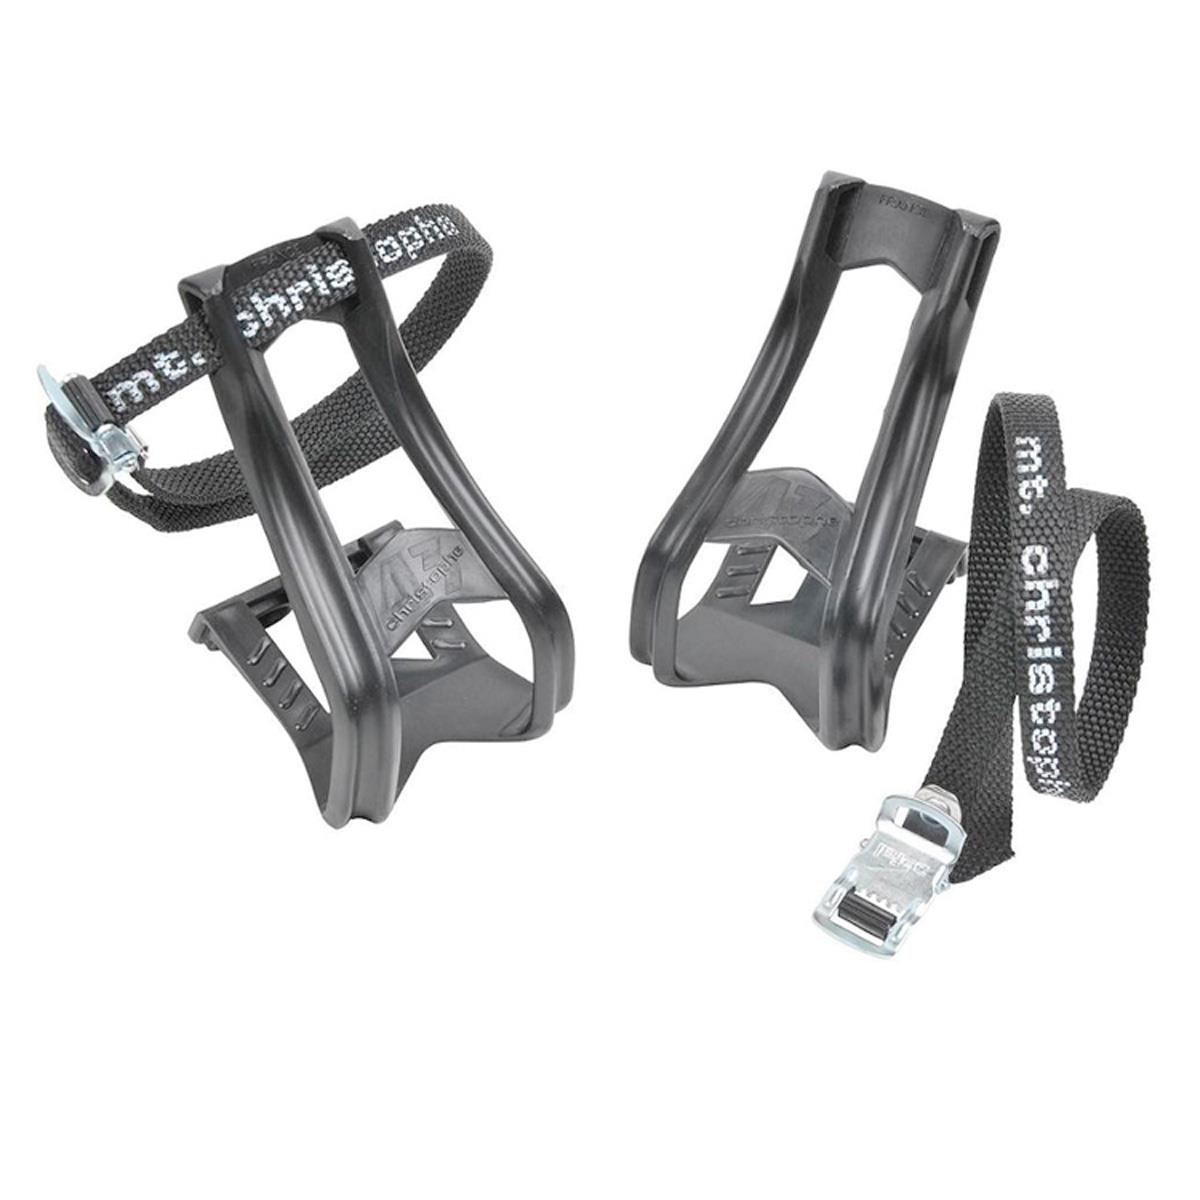 Zefal 43 + 515 Bicycle Pedal Toe Clips and Straps (S/M)